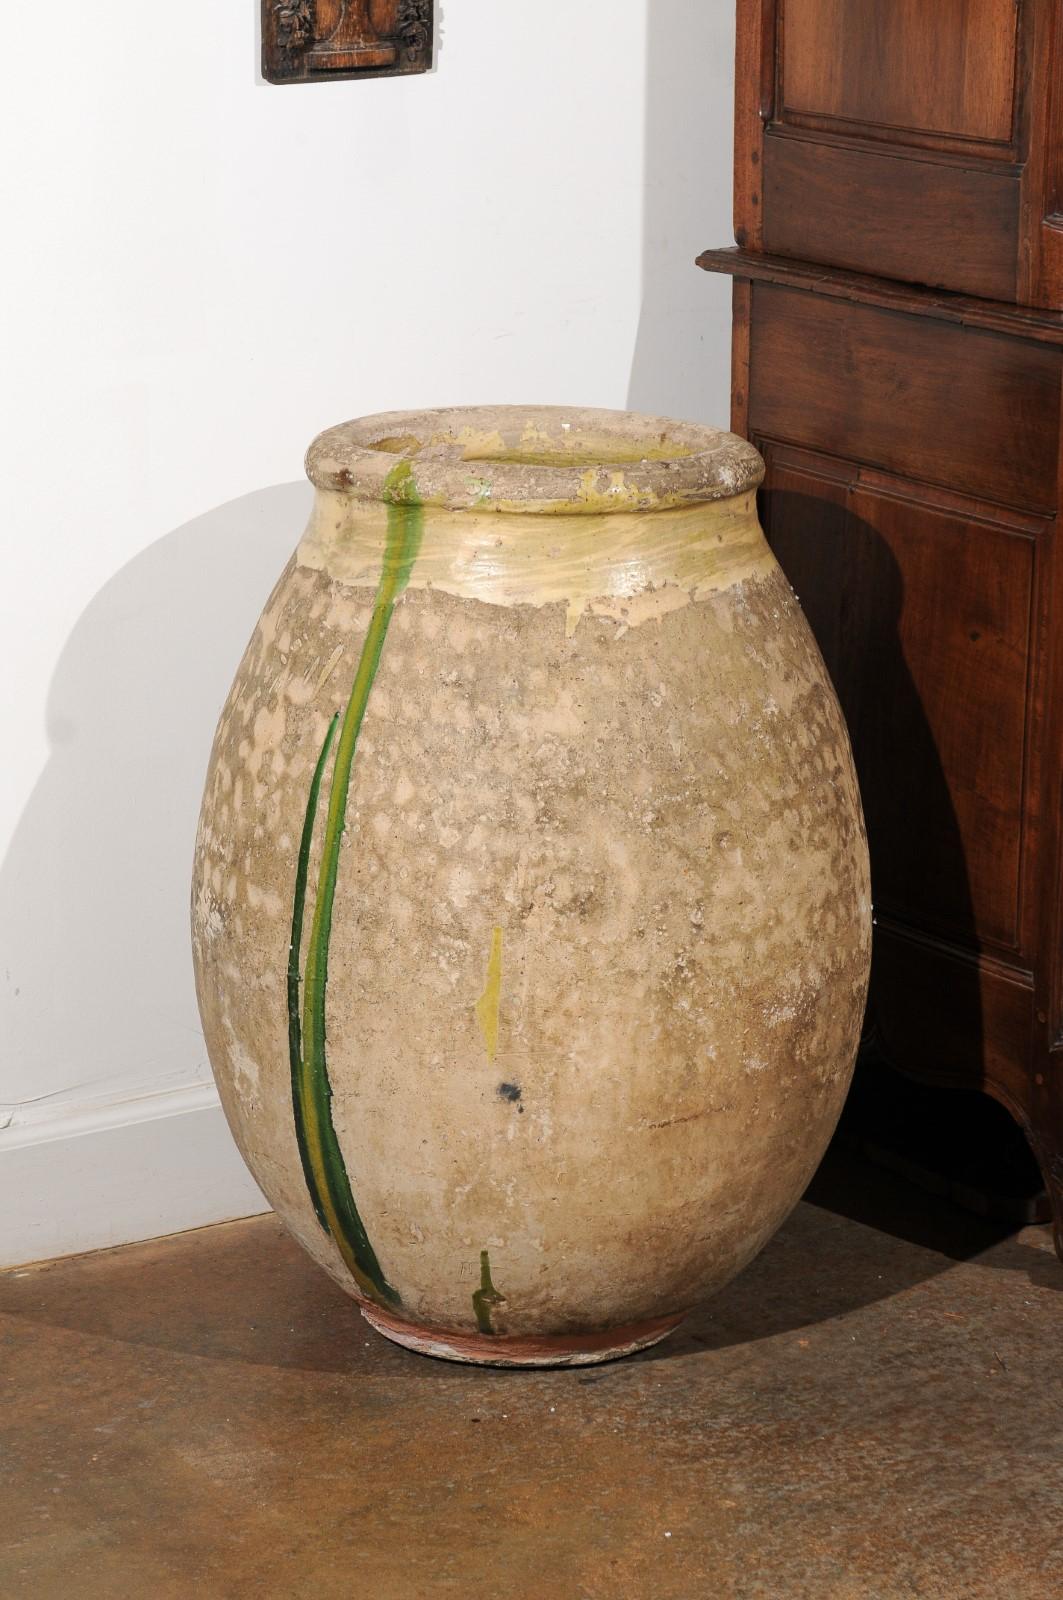 French Provincial 19th Century Terracotta Biot Jar with Yellow and Green Glaze 1